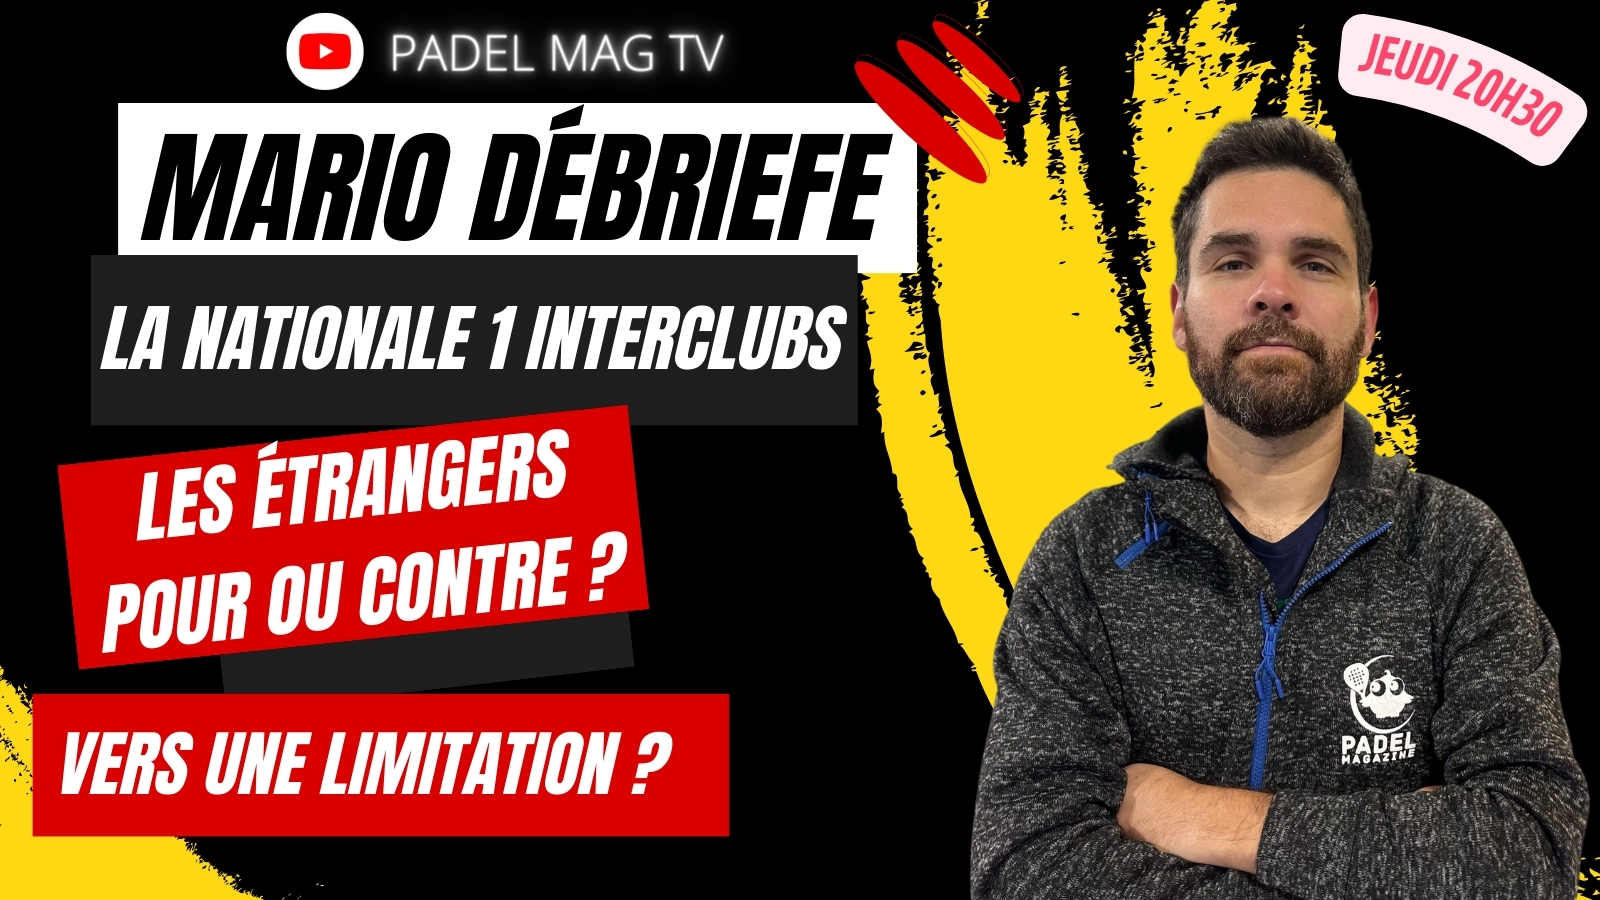 Mario debriefs the controversy concerning the Nationale 1 Interclubs